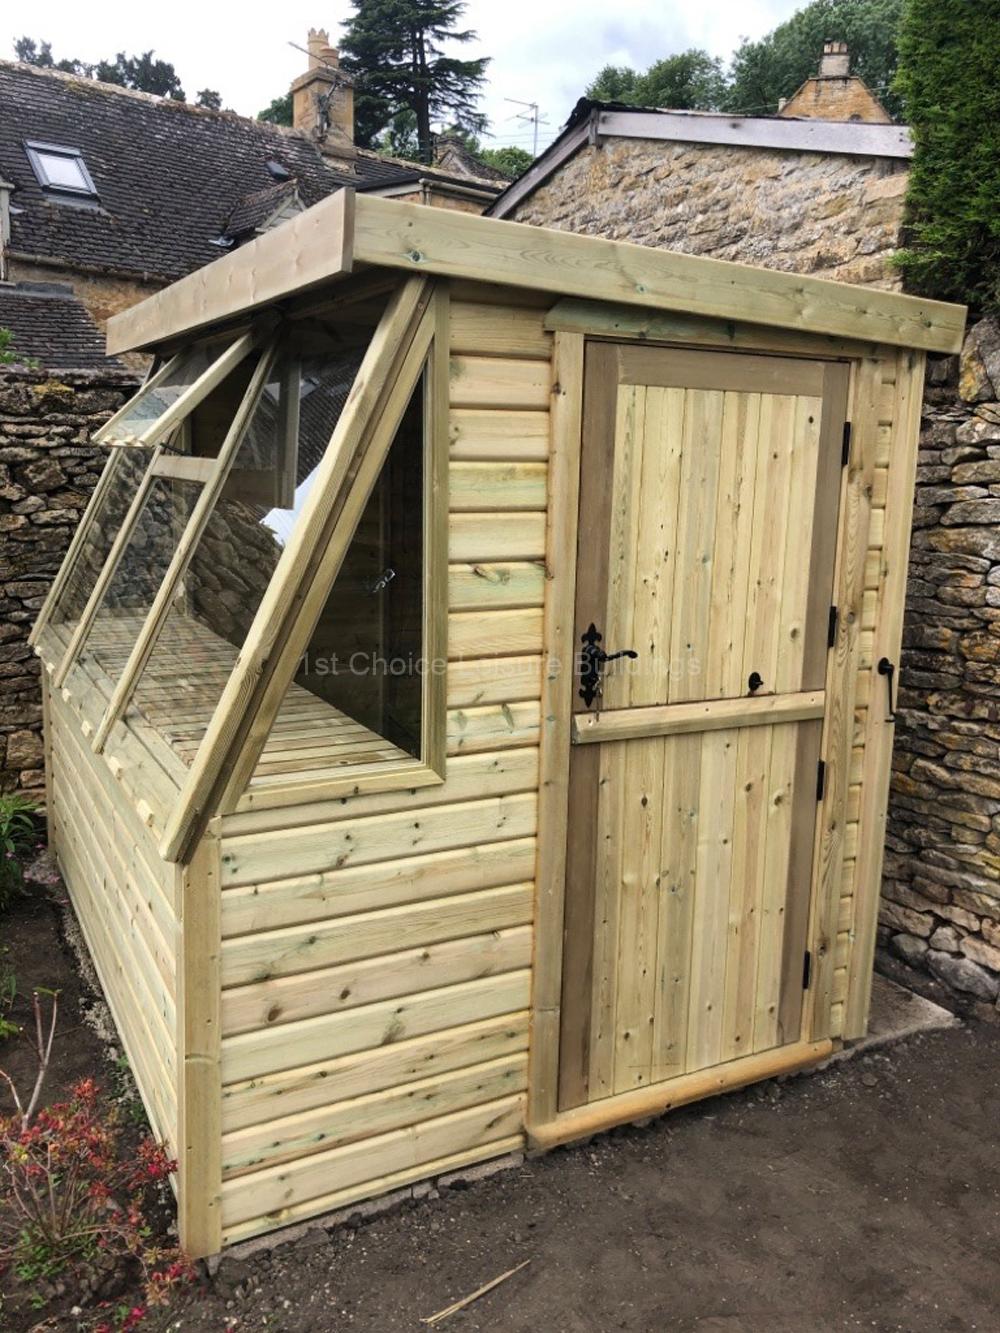 1st Choice Platinum Alton Pressure Treated Traditional Potting Shed With Free Assembly 22